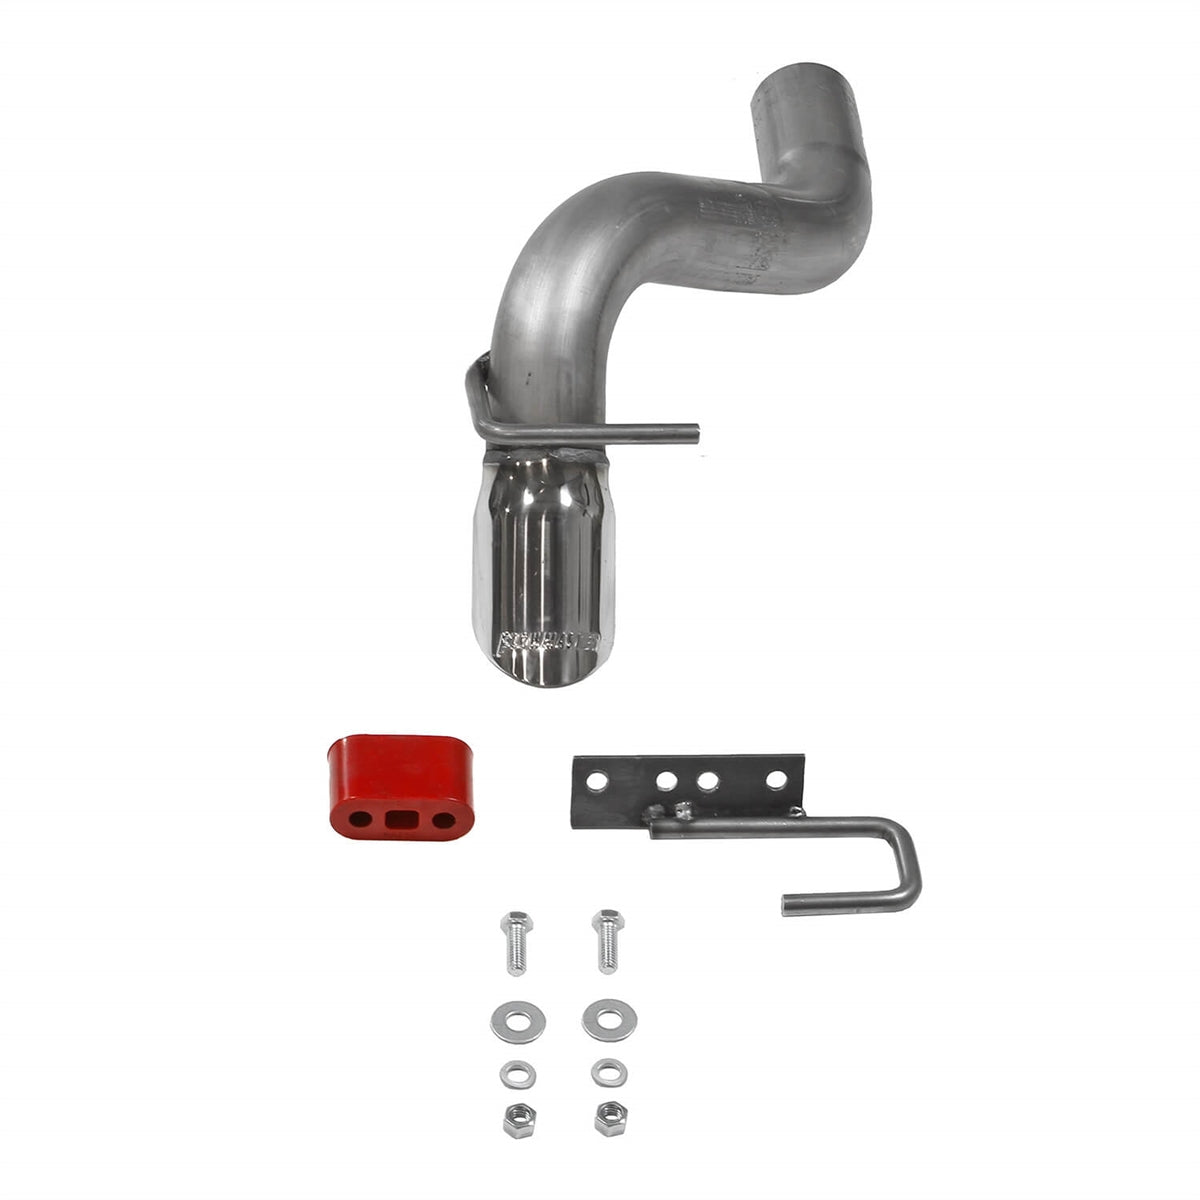 Flowmaster Outlaw Axle-Back Exhaust System for 21-C Ford Bronco